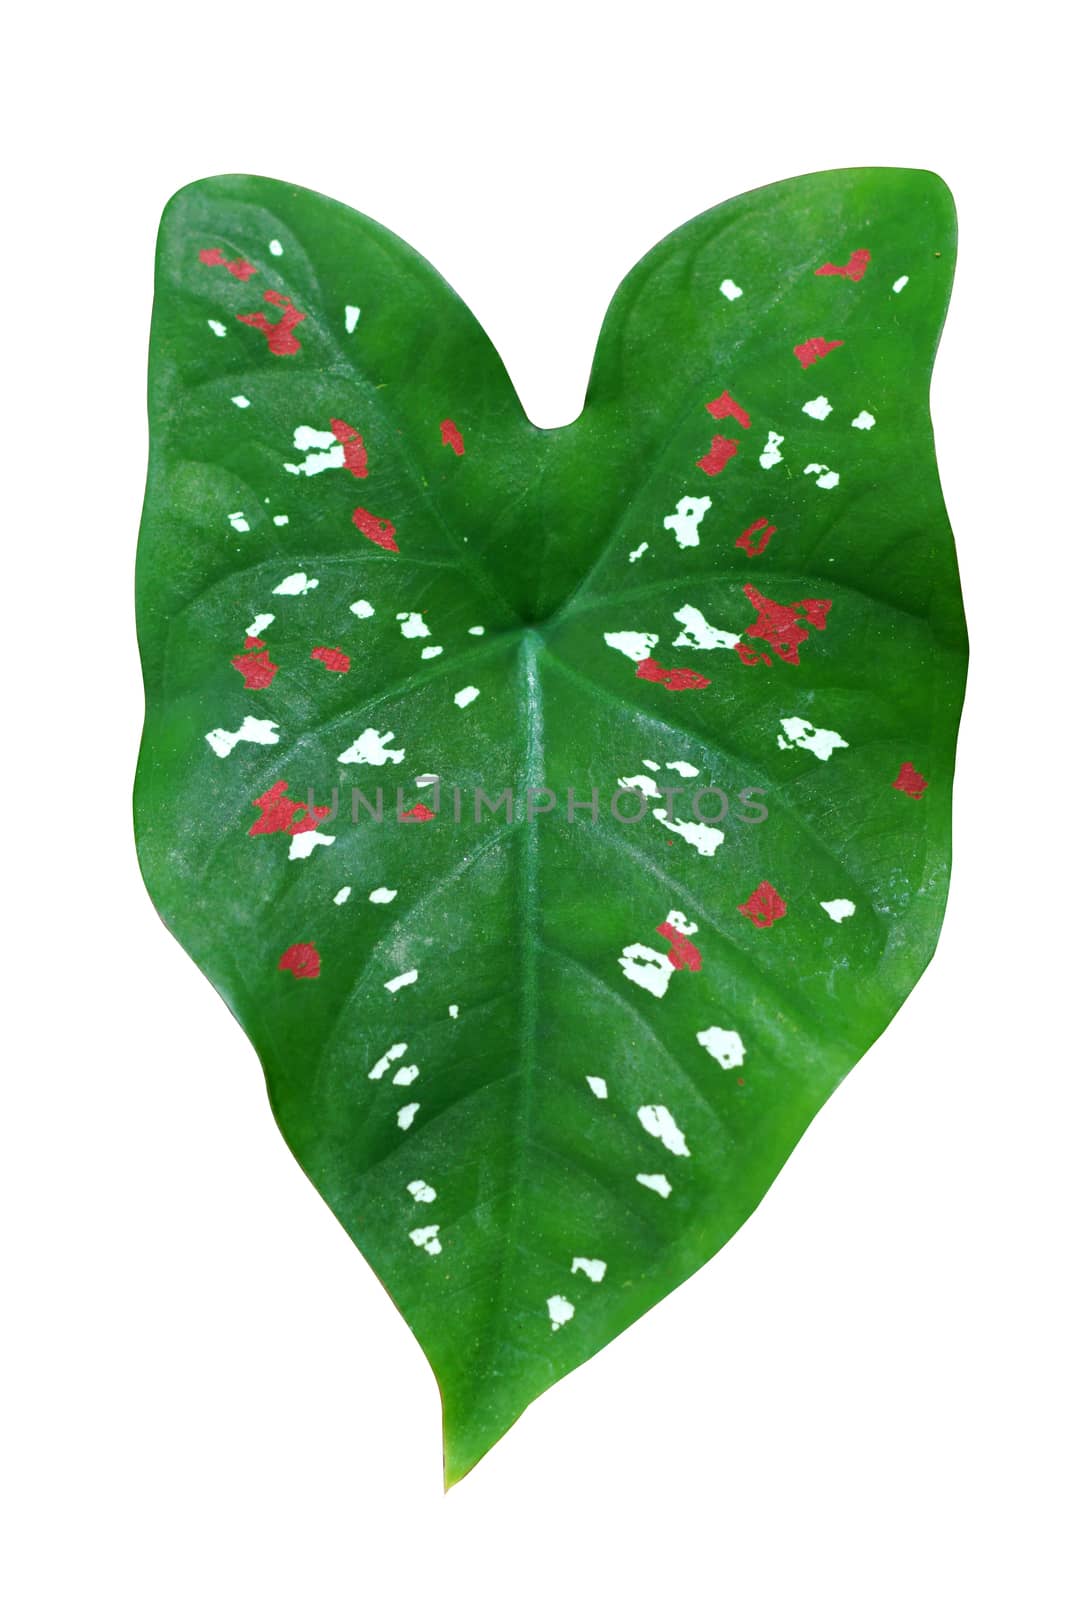 Green leaves of Caladium Becolor red and white polka dots.